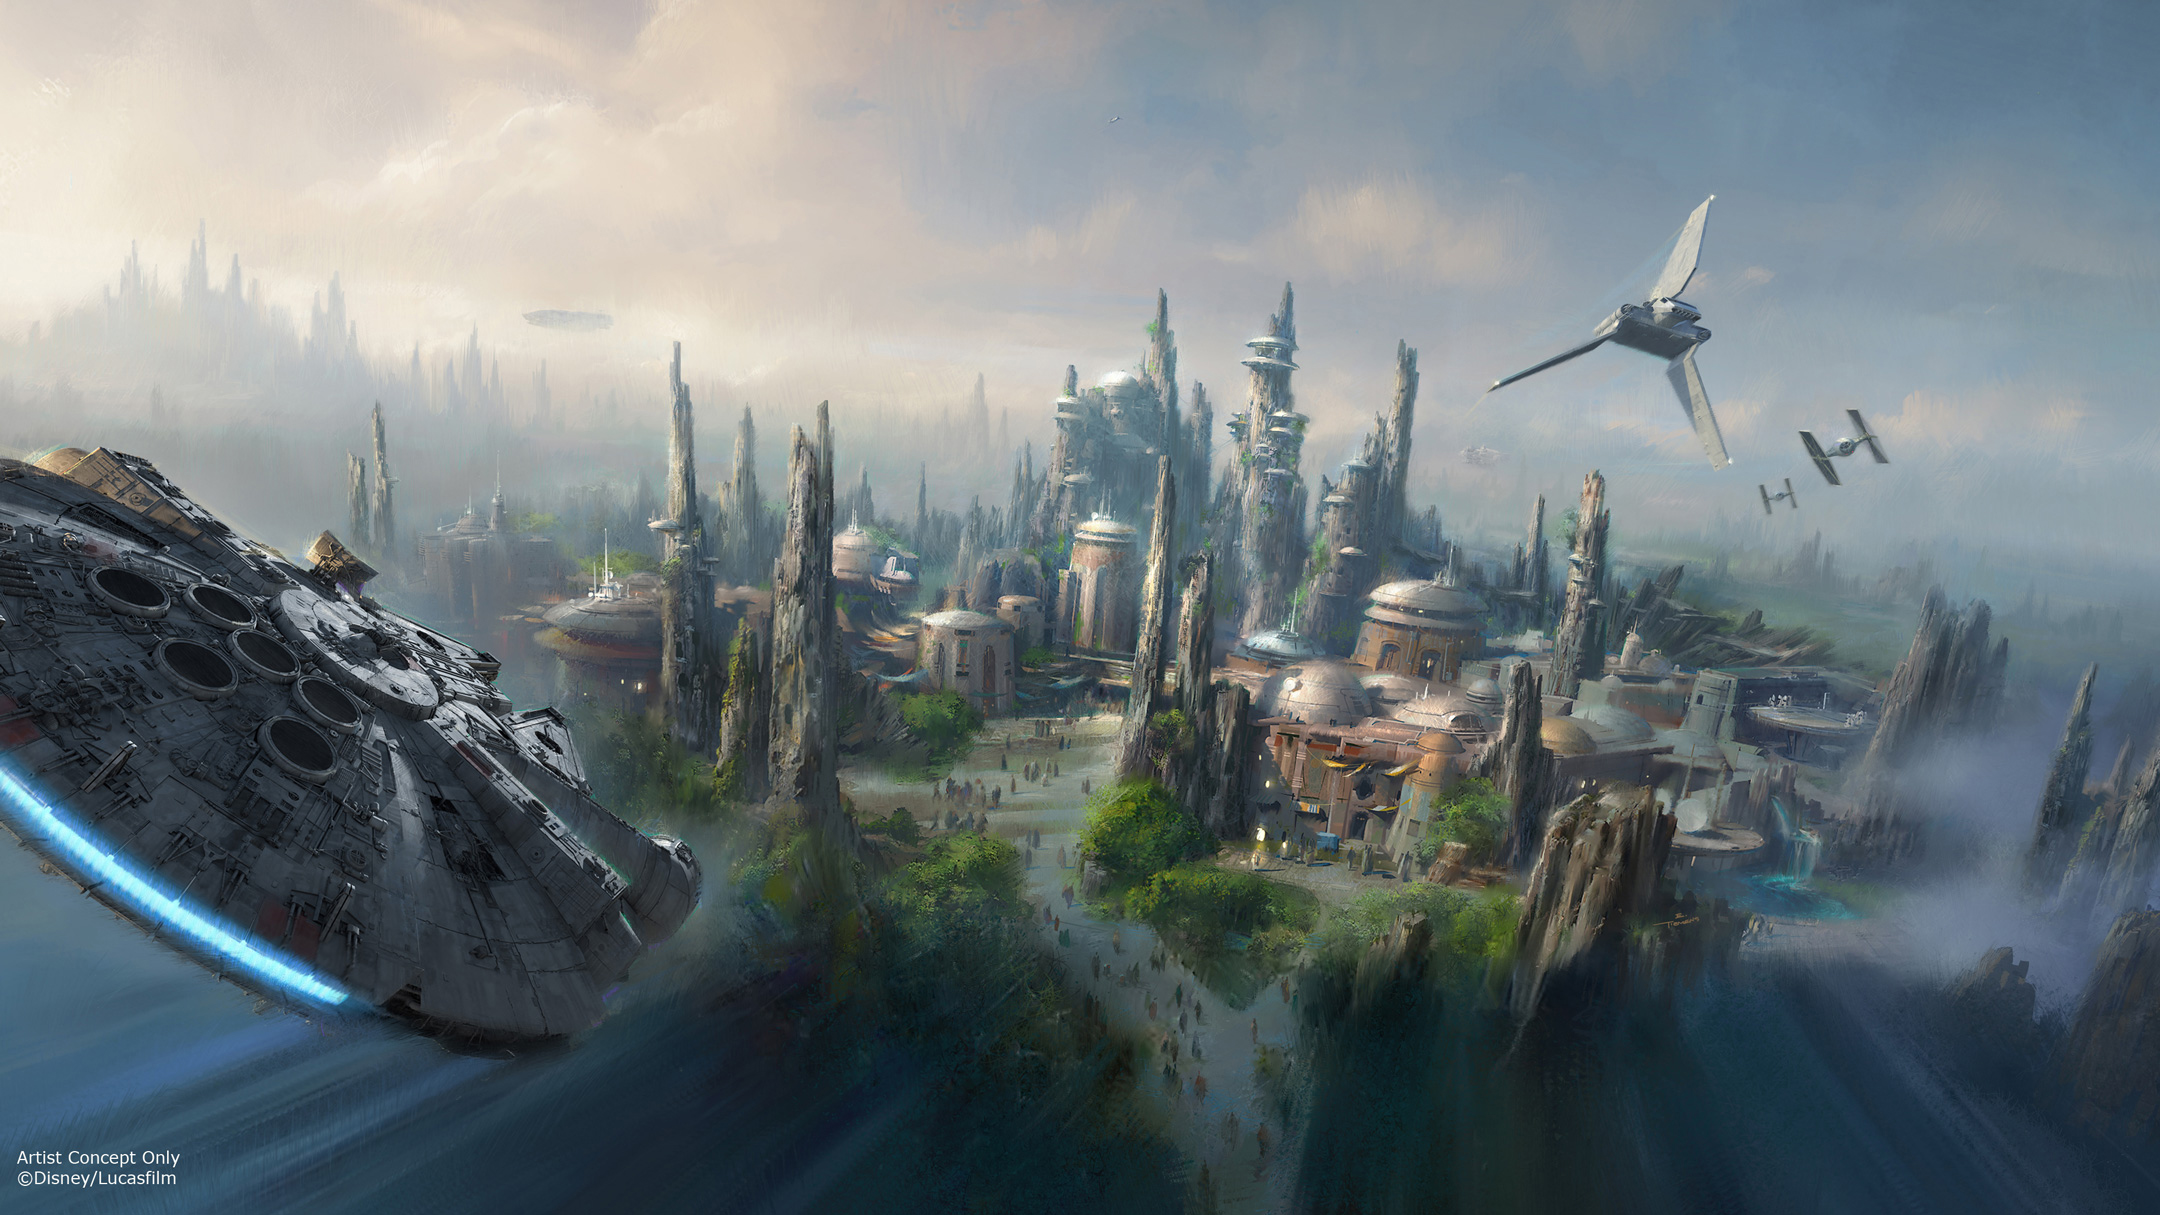 Harrison Ford Provides New Details on Upcoming Disney Parks ‘Stars Wars’ Experience